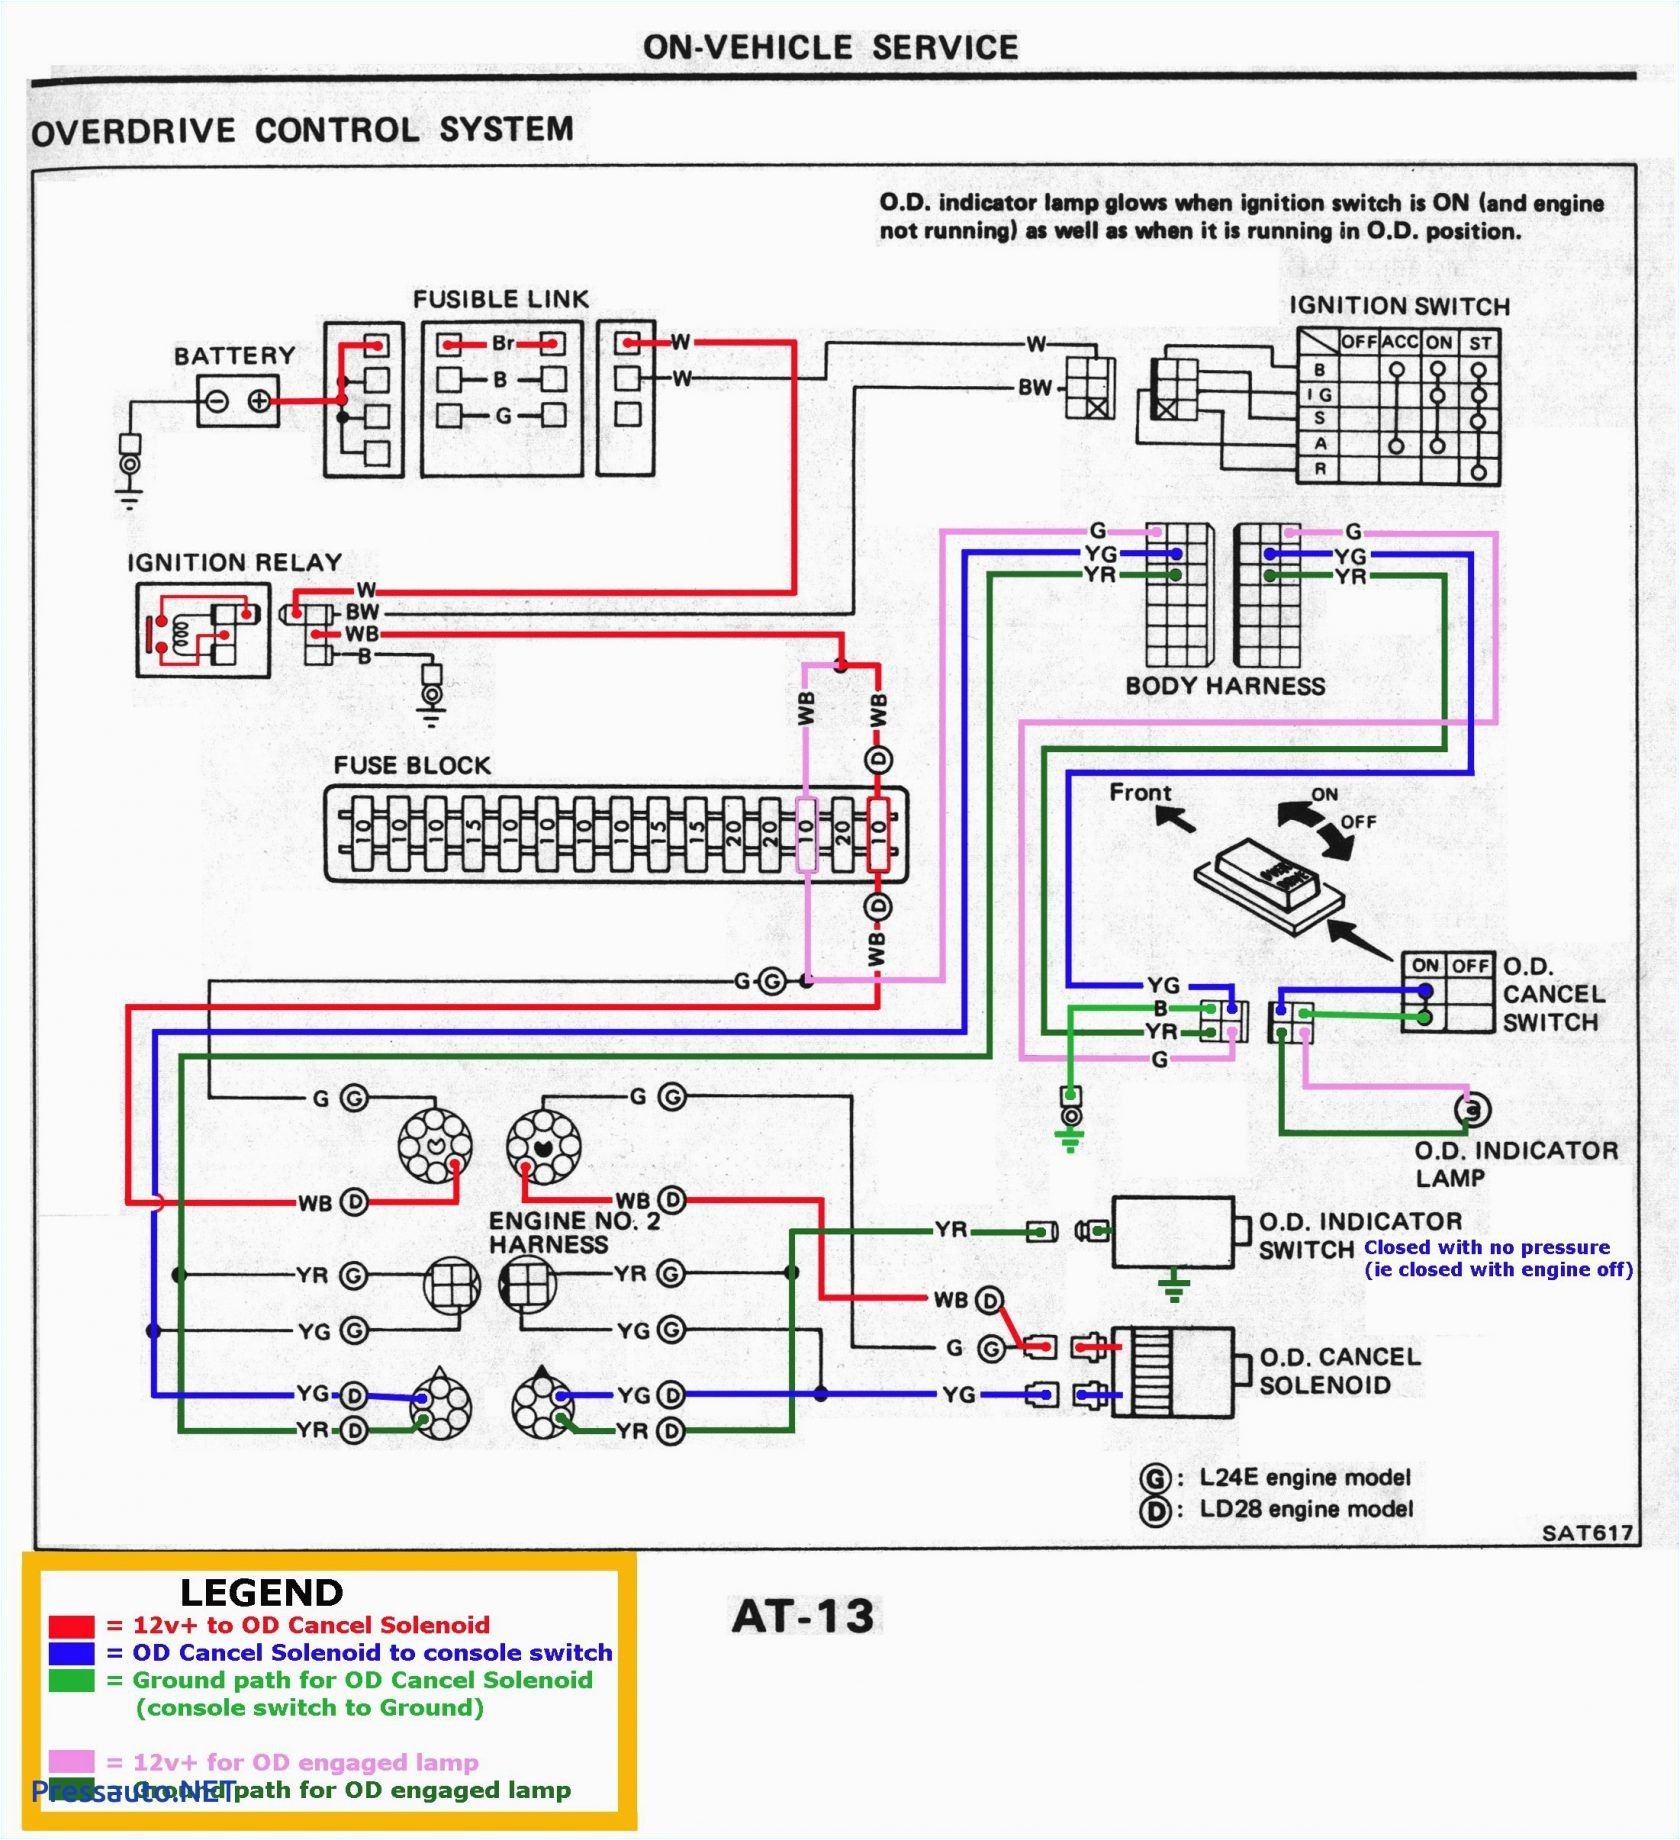 2001 chevy wiring harness diagram wiring diagram value 2001 chevy silverado radio wiring diagram 2001 chevy radio wiring diagram